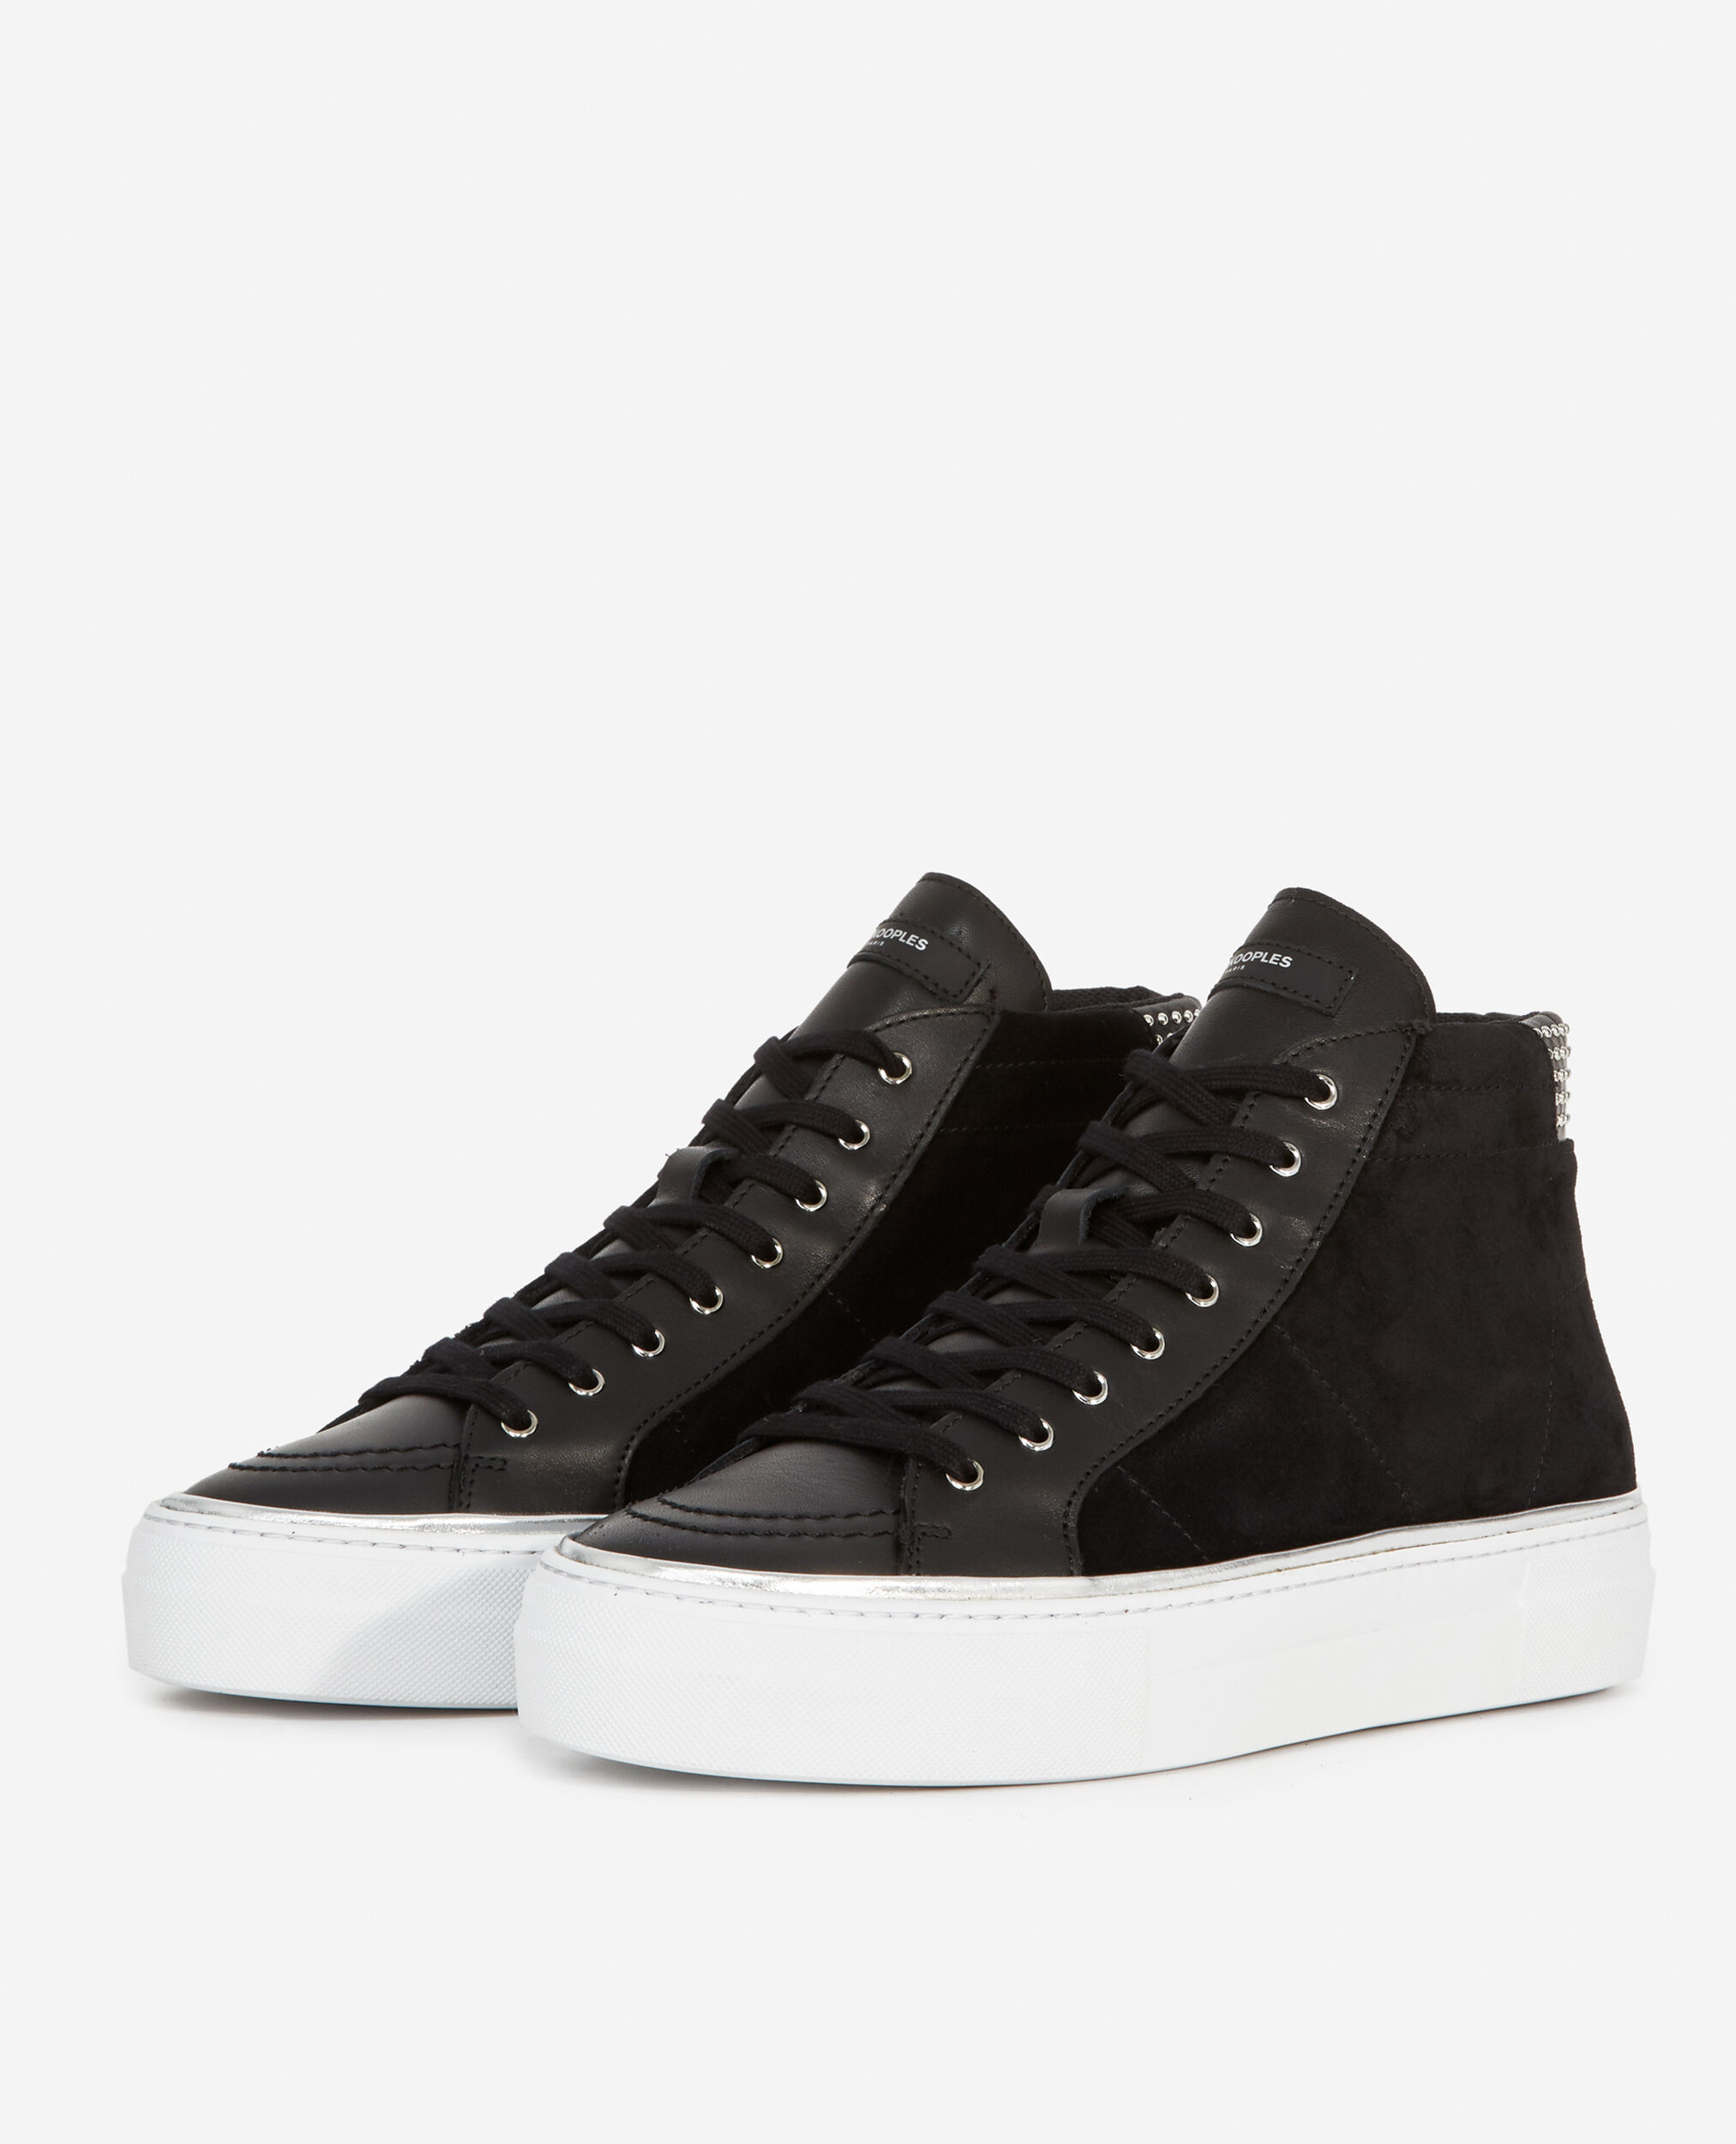 Black high-top sneakers with suede, BLACK, hi-res image number null